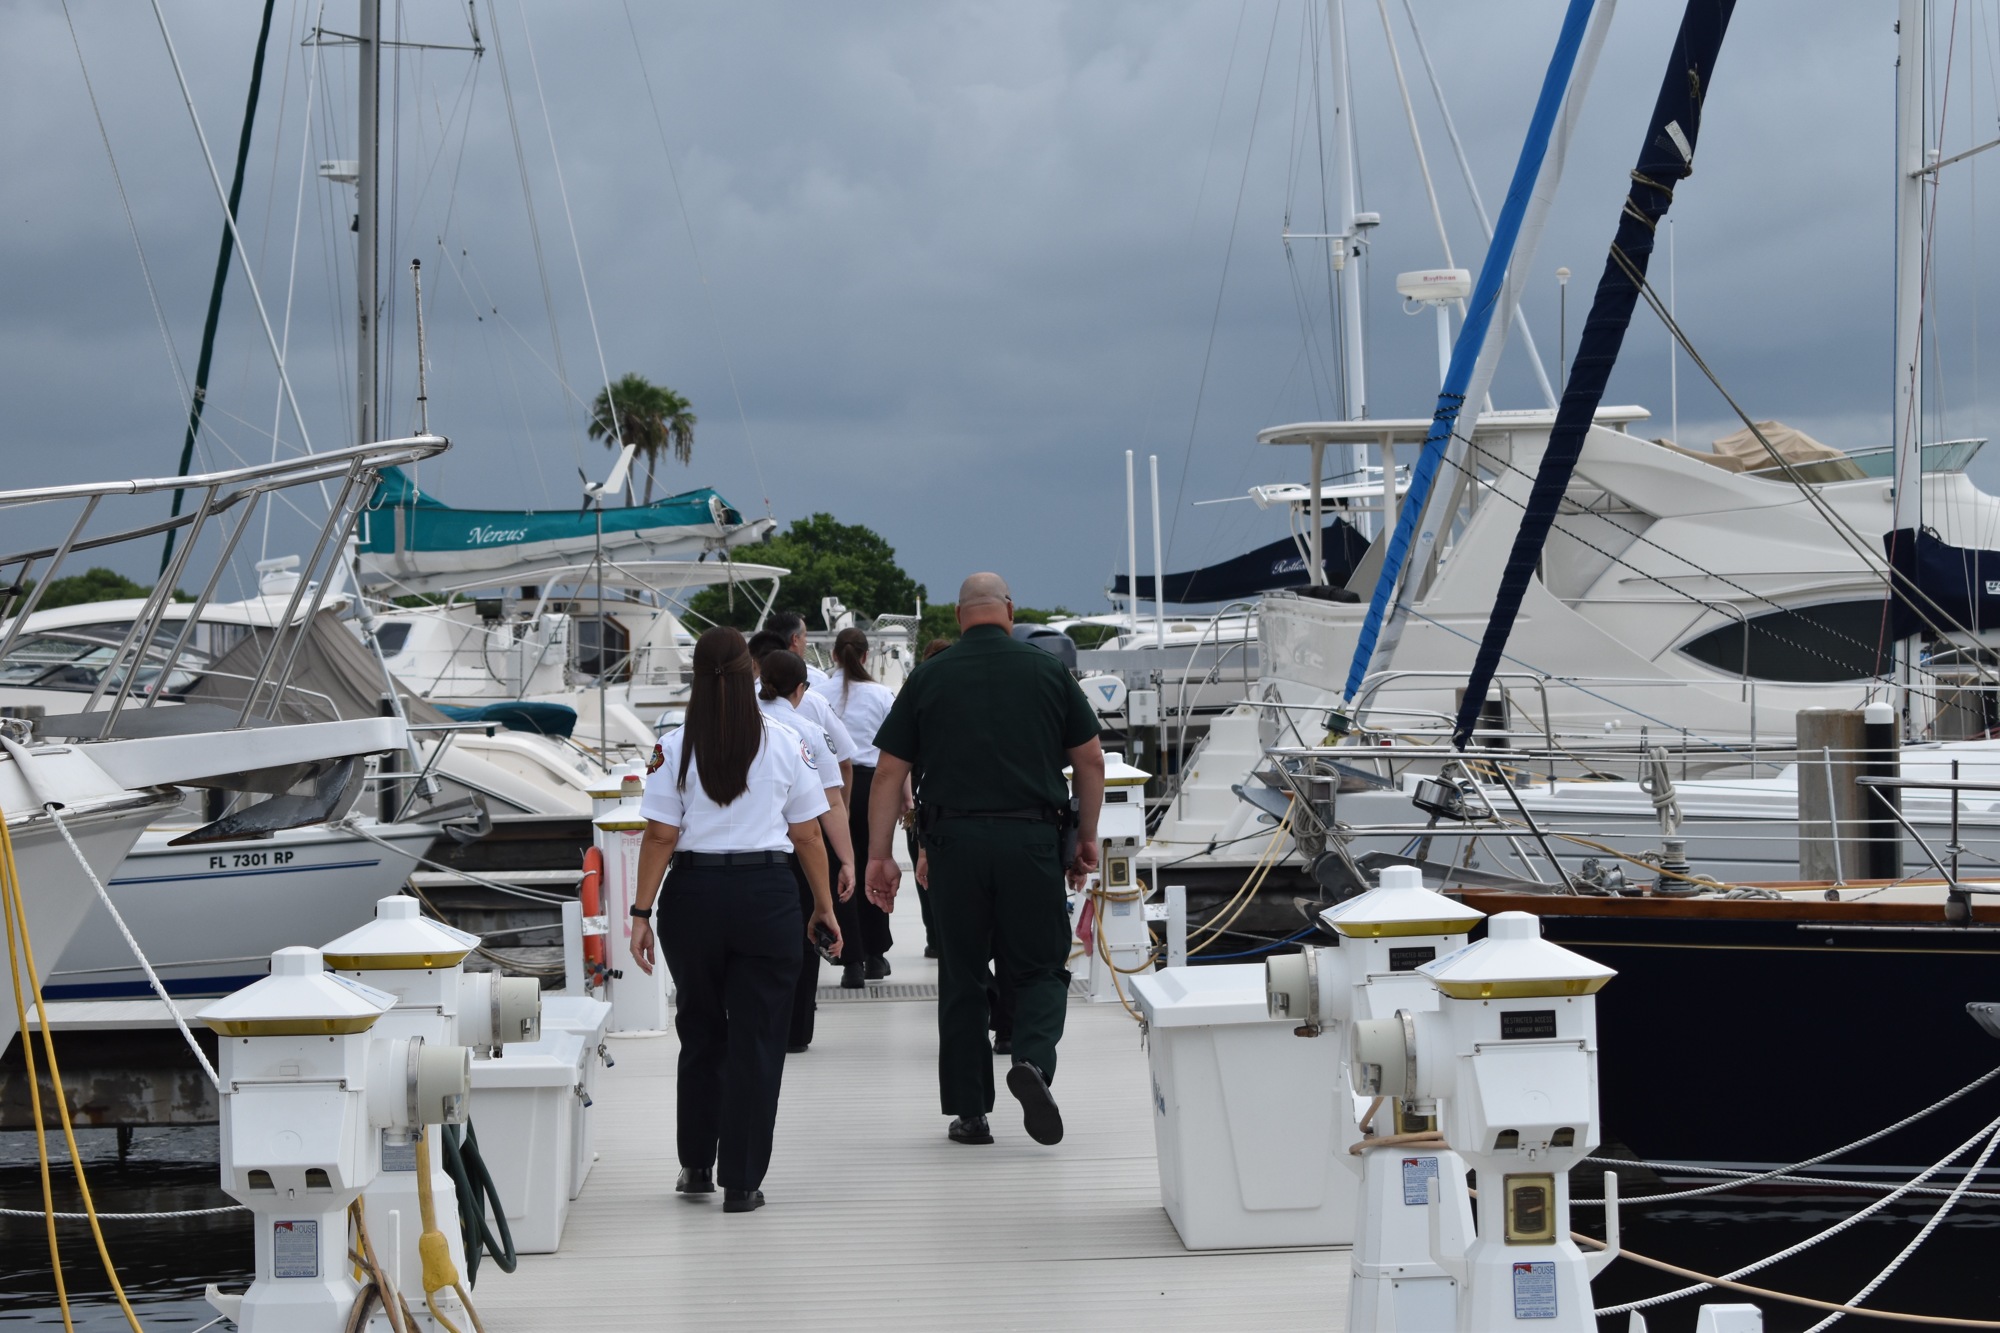 Dezzi and Adams took SEOB personnel to the Longboat Key Club Moorings, where the fire and police departments keep boats. 